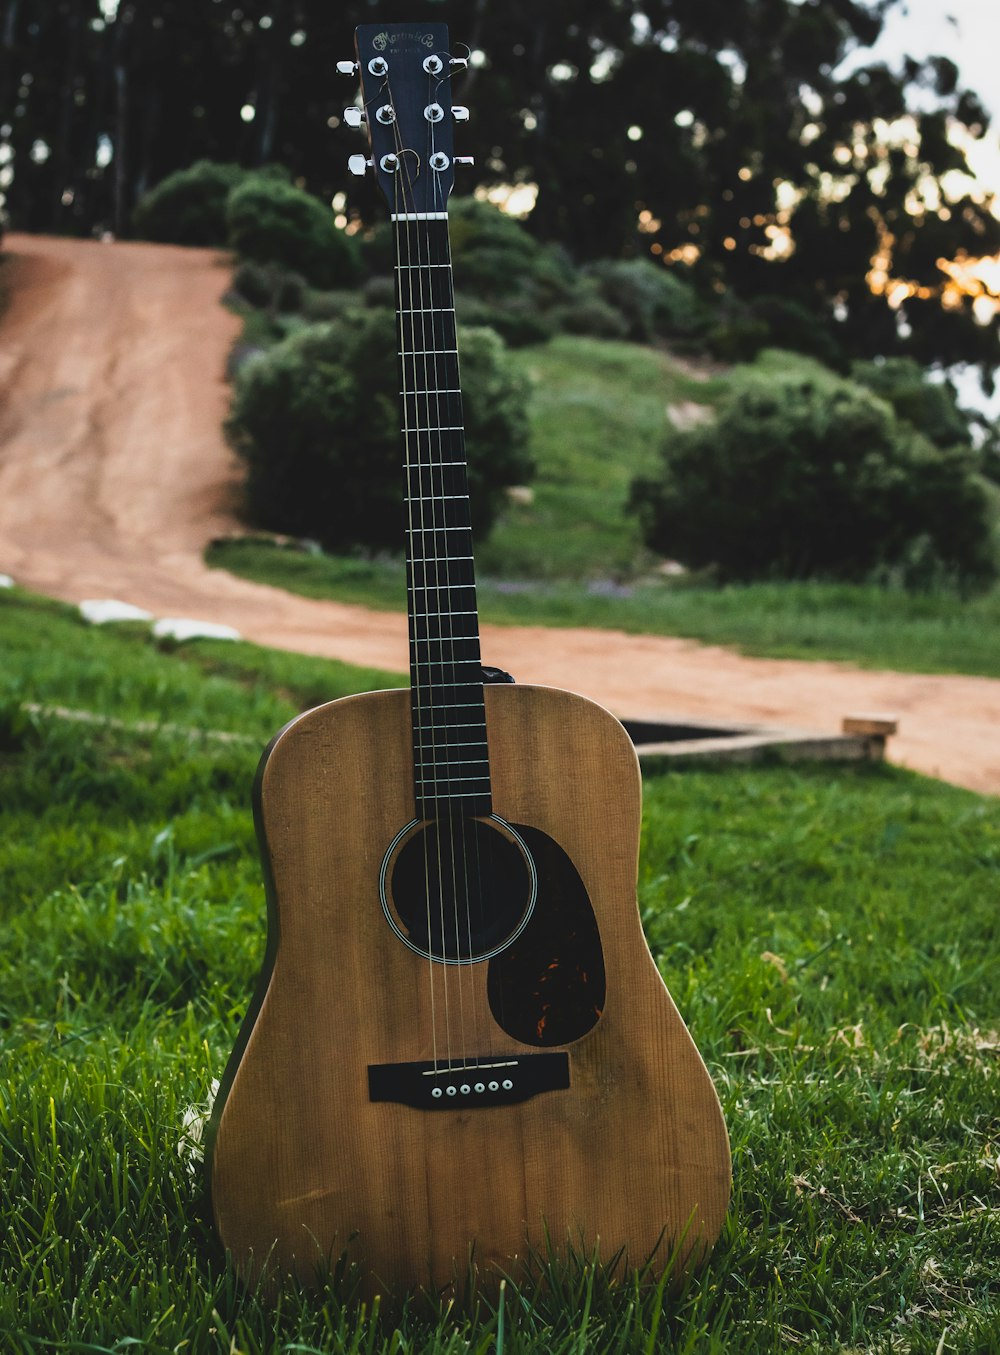 a guitar sitting in the grass in a park